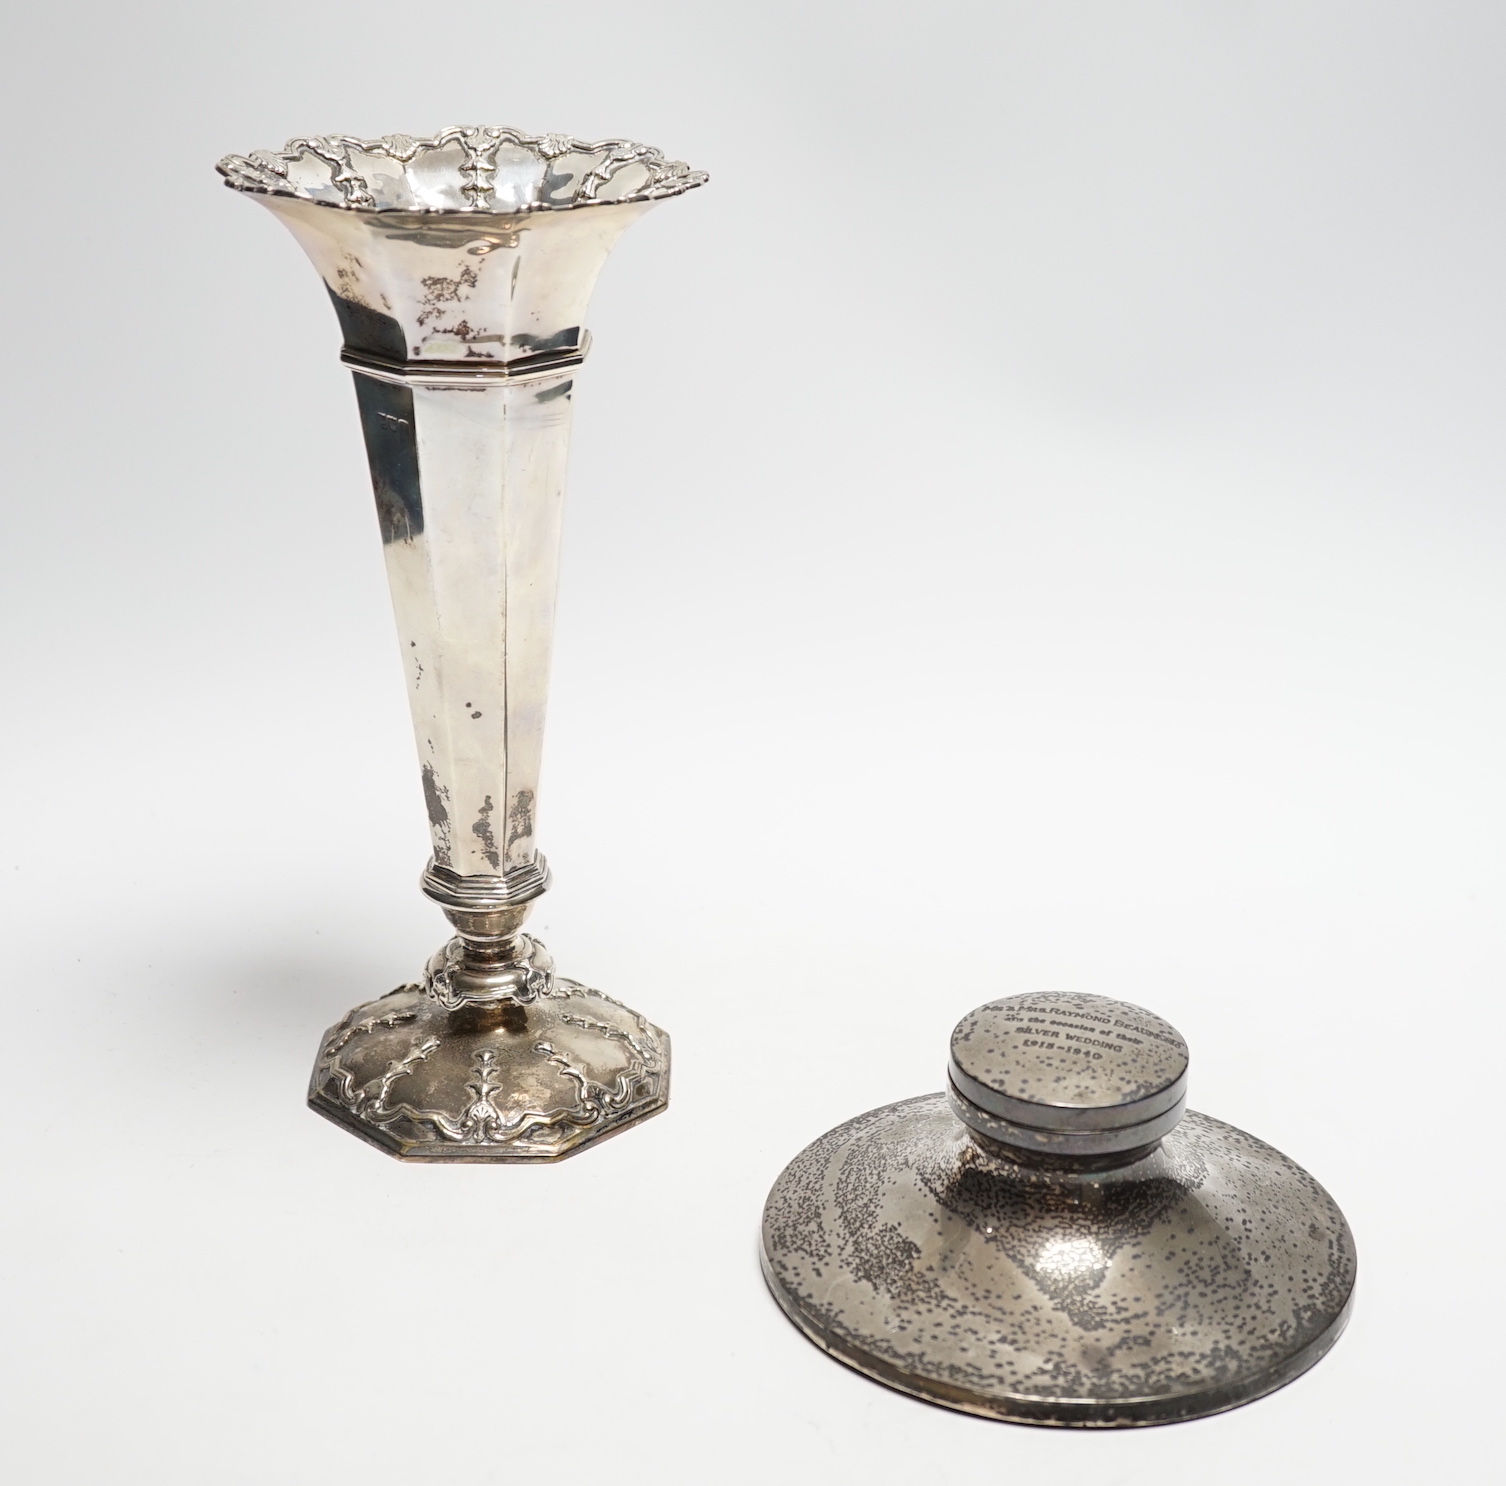 An Edwardian silver trumpet vase, London, 1906, 23.3cm, weighted and a silver mounted inkwell.